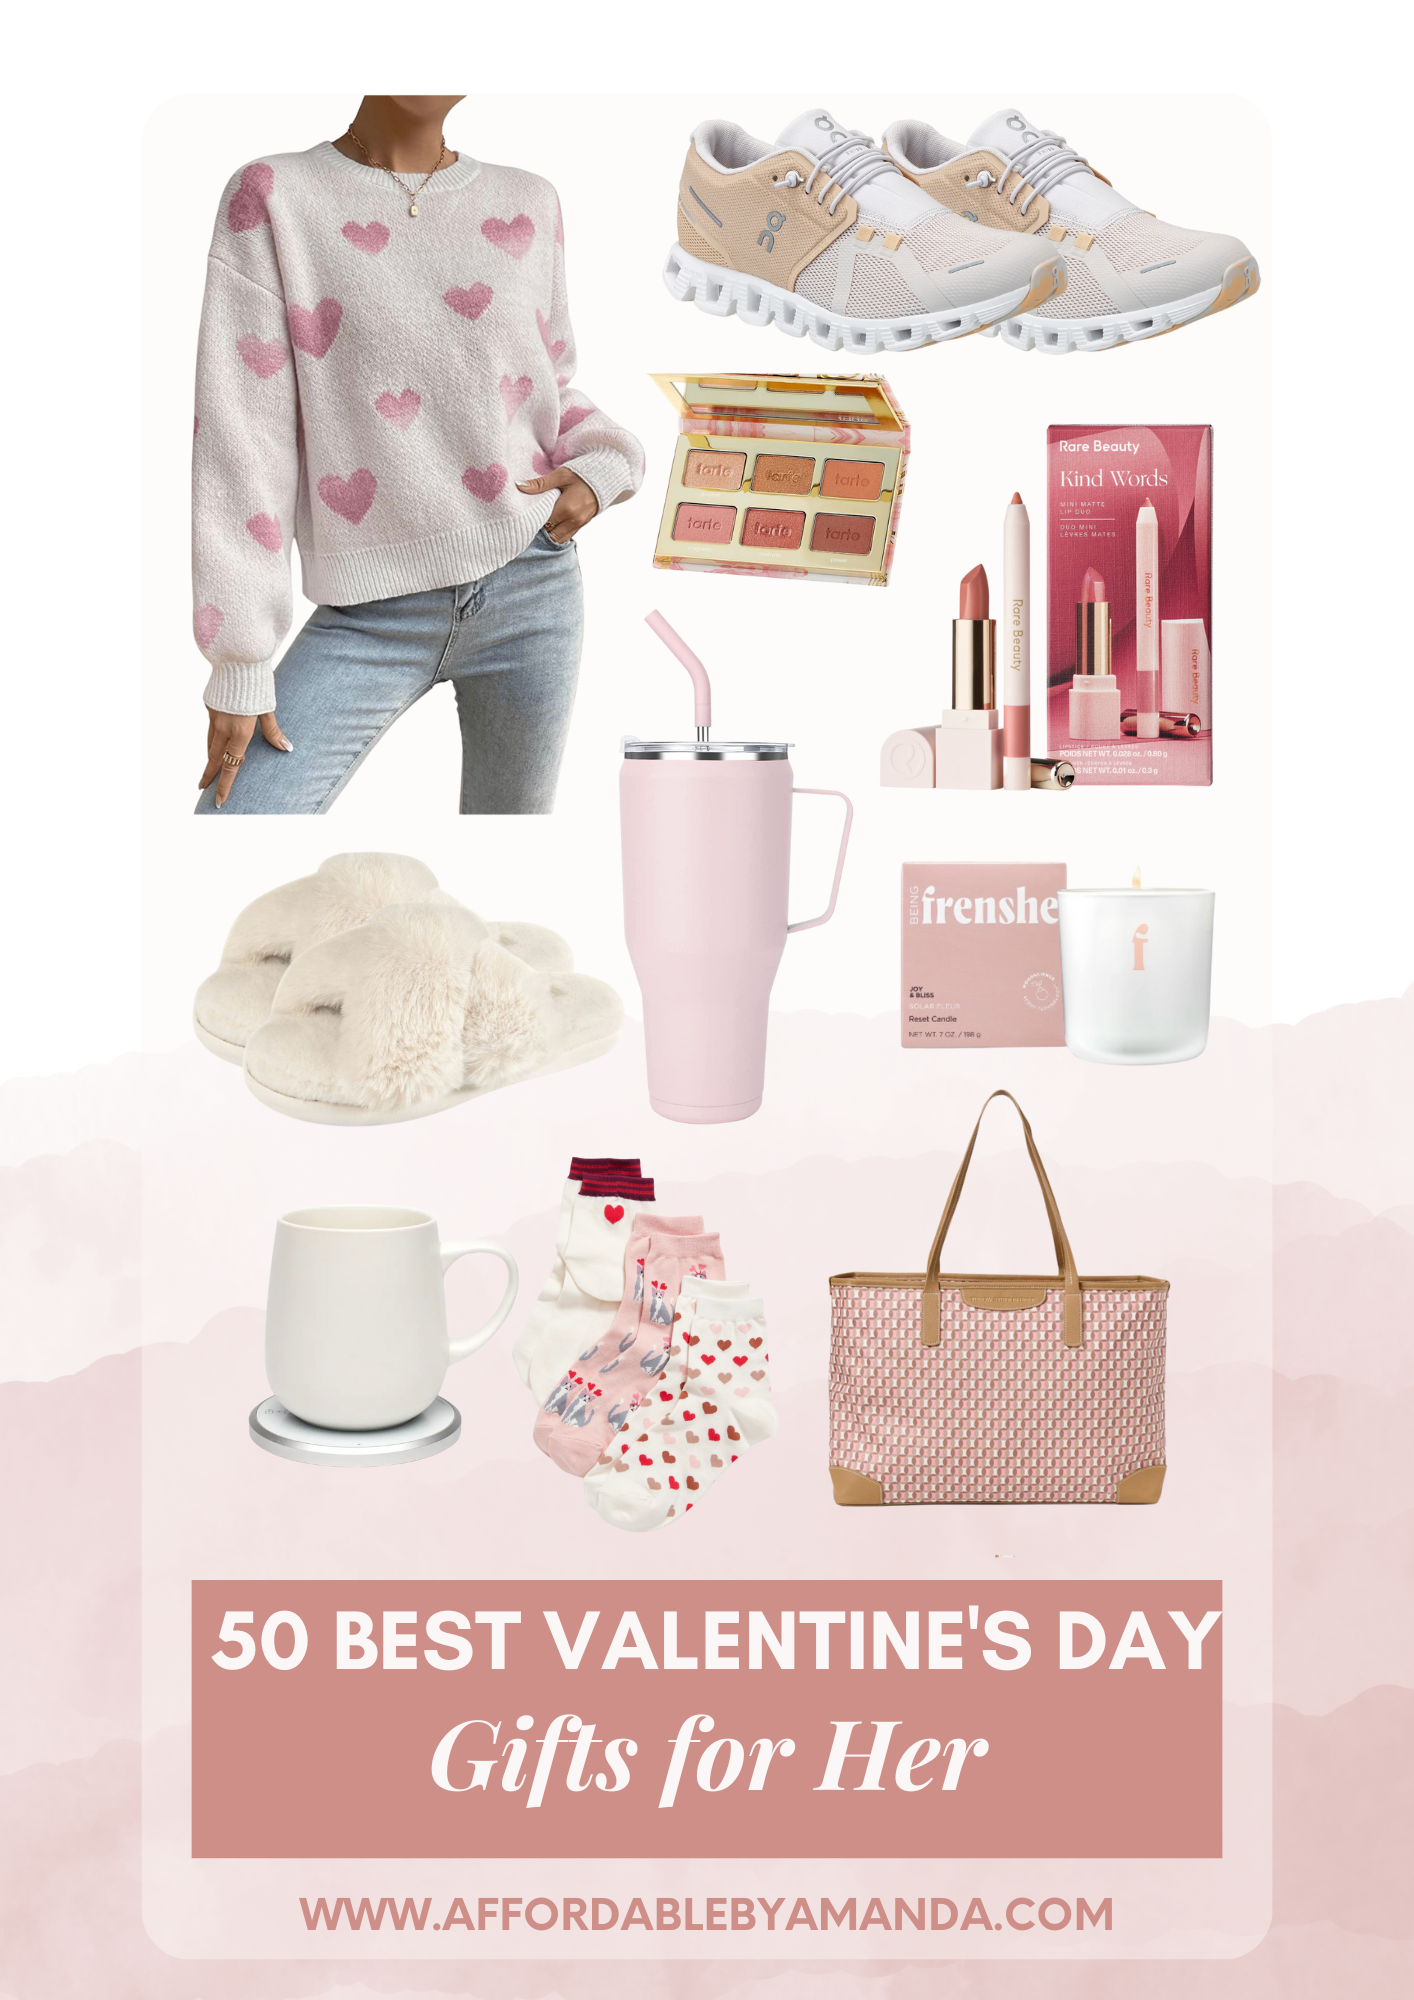 50 Best Valentine's Day Gifts for Her at Every Price